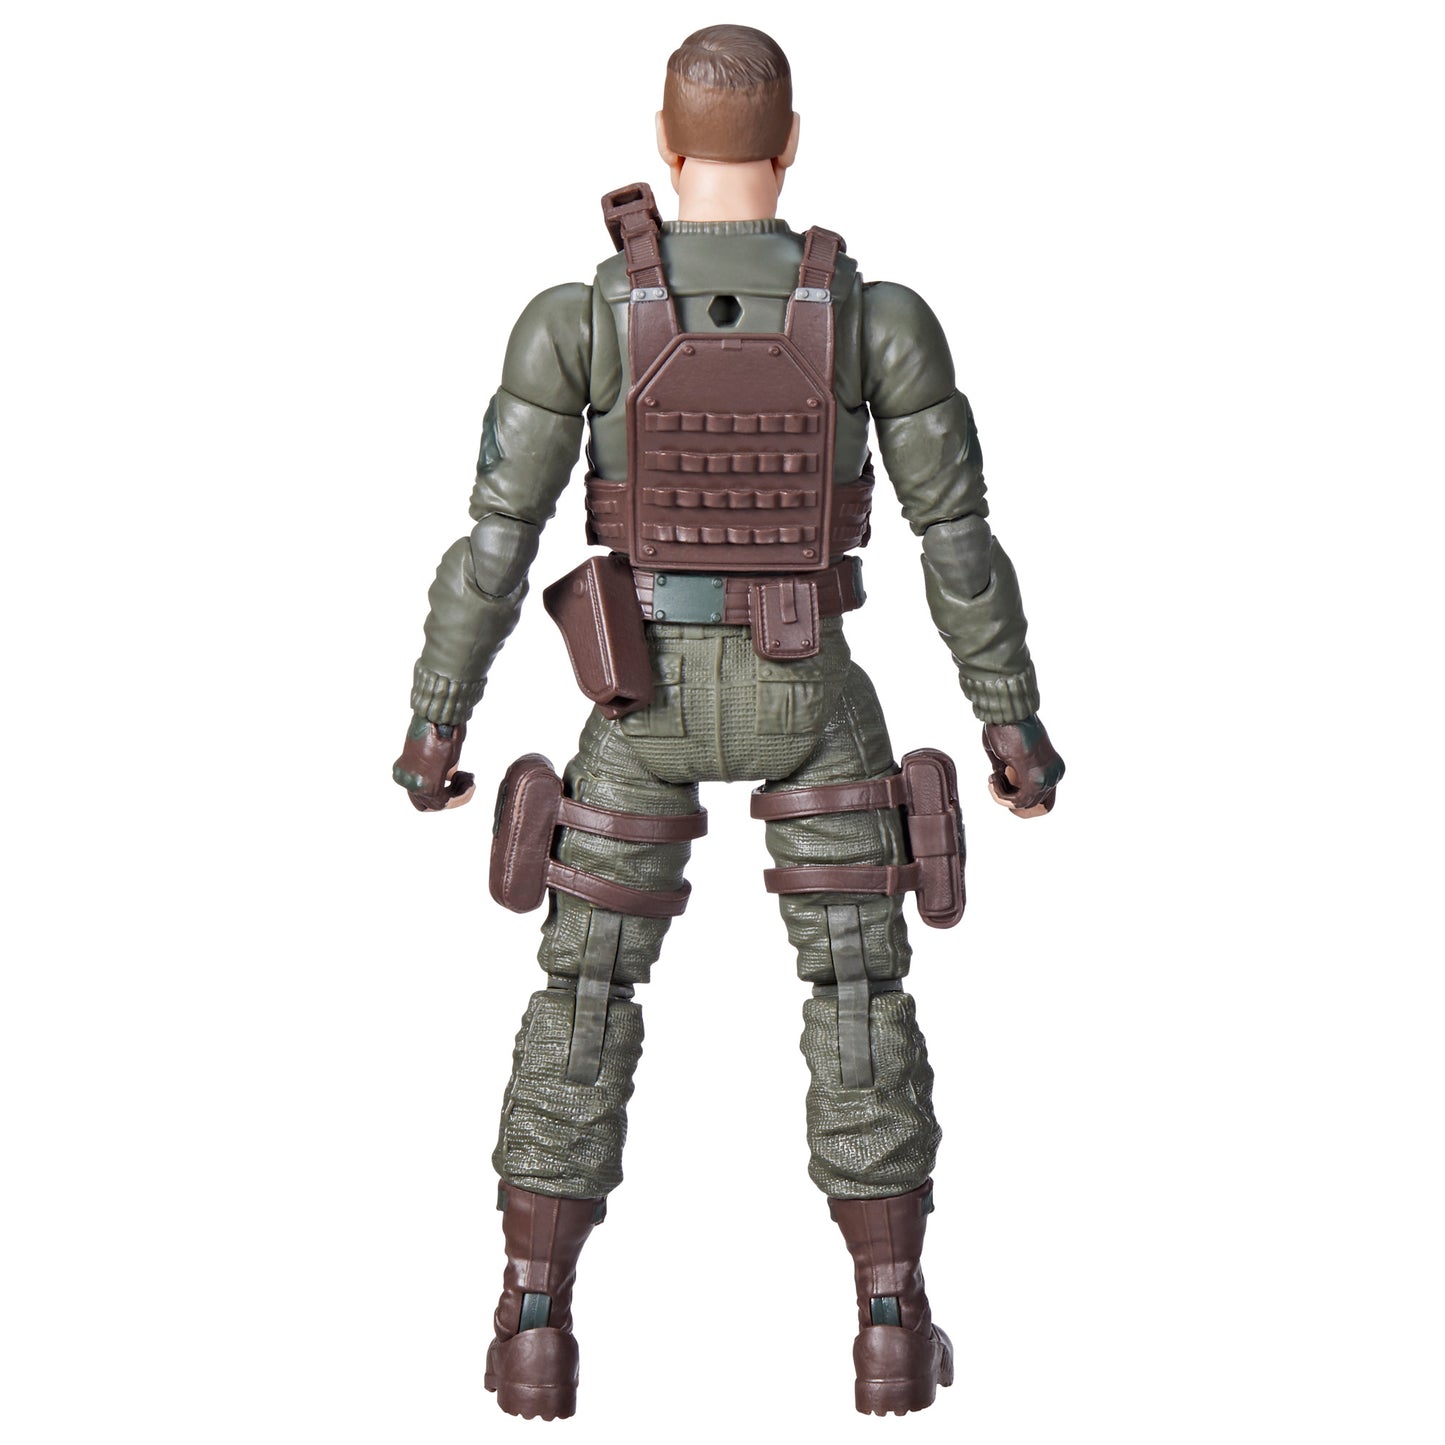 G.I. Joe Classified Series Robert "Grunt" Graves, 87 Action Figure Toy back view - Heretoserveyou